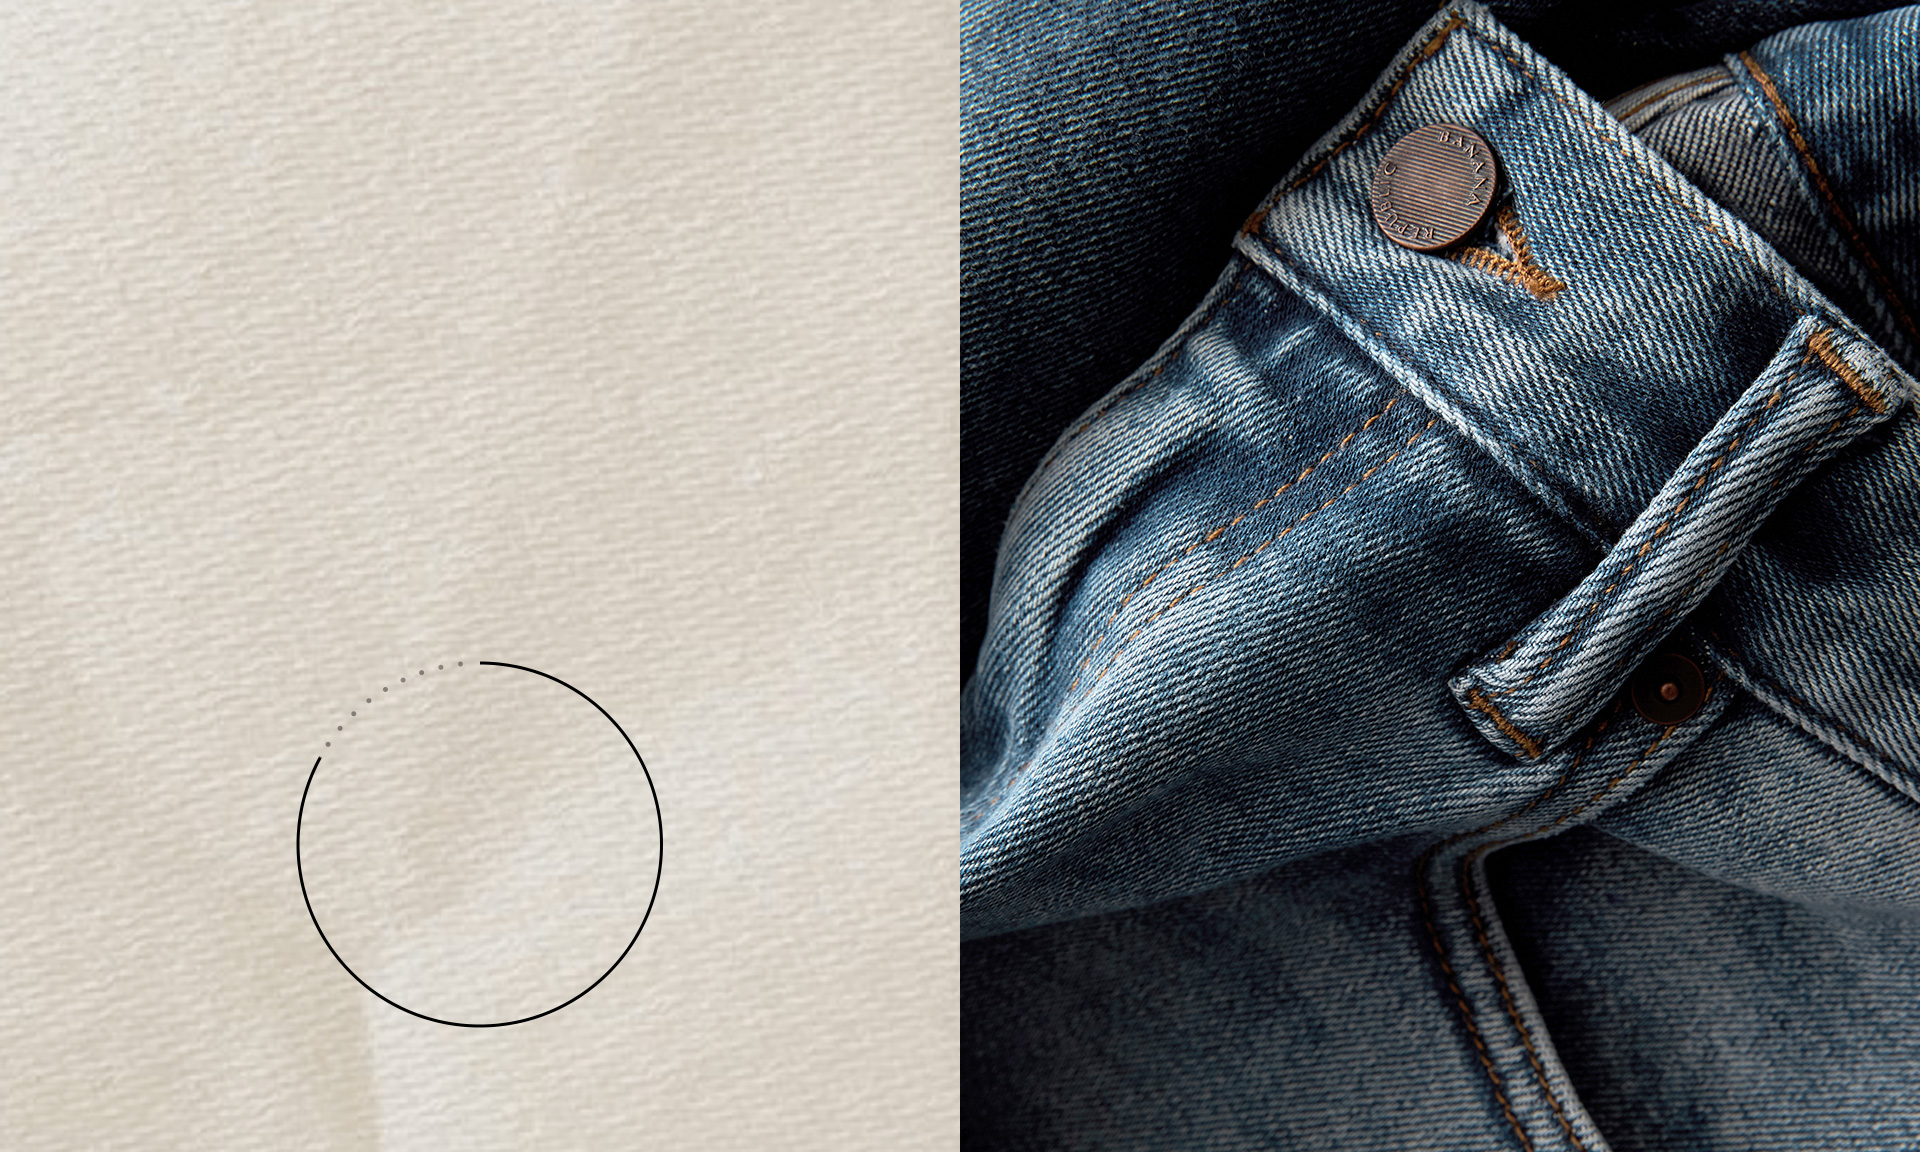 BY 2023 WE AIM TO USE 100% MORE SUSTAINABLE DENIM. Focusing on water-savings via Gap Inc.’s Washwell Program, which uses as least 20% less water in the garment wash process compared to conventional techniques, sourcing more sustainable fibers, using more sustainable dye methods such as foam dye, eco-friendly finishes such as laser technology, and trims made from recycled materials. 83% of our goal